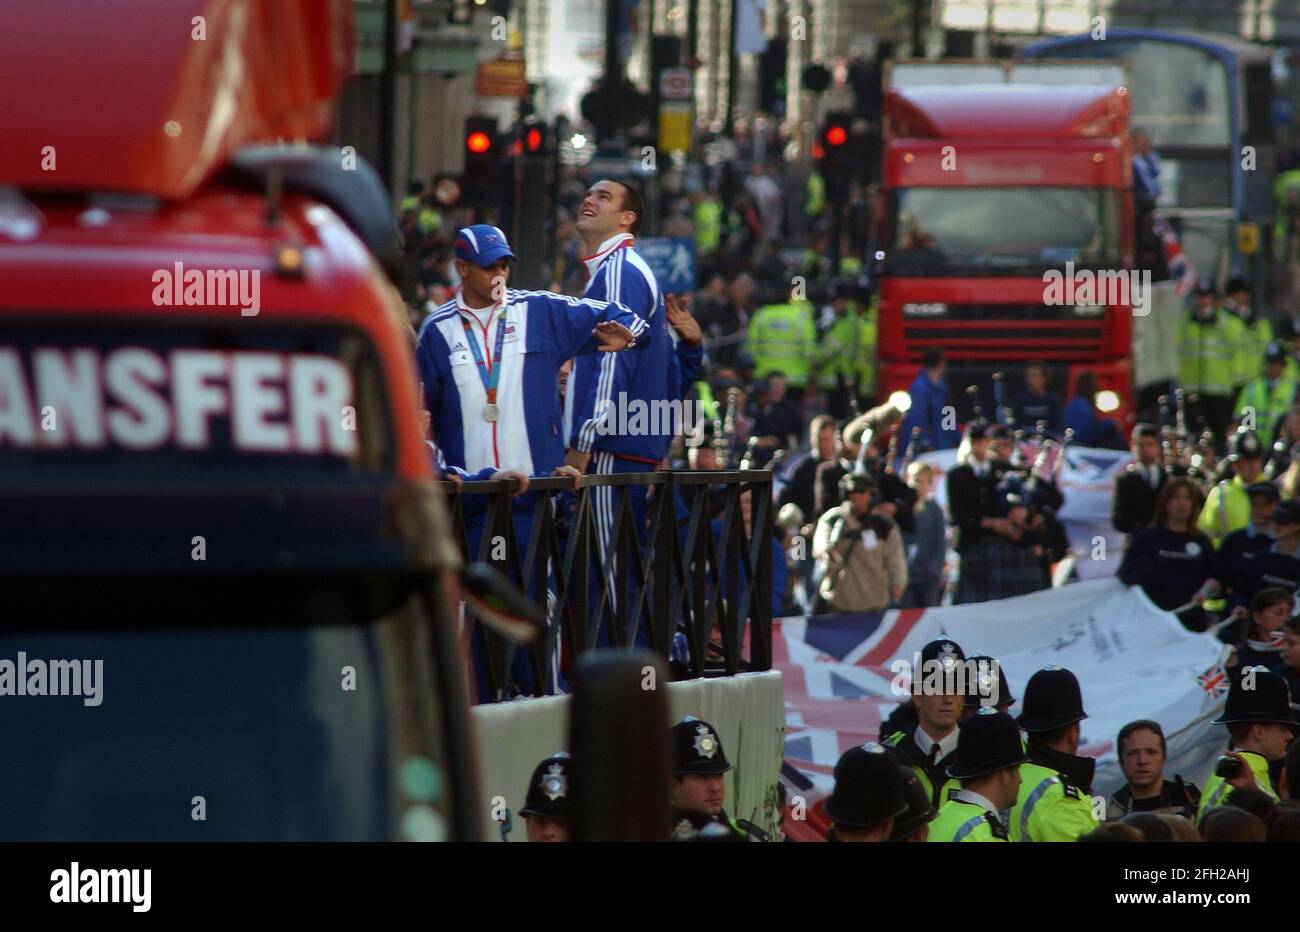 AMIR KHAN AS PART OF THE SUCCESSFUL BRITISH OLYMPIC TEAM PARADE THROUGH LONDON . 18/10/04 PILSTON Stock Photo